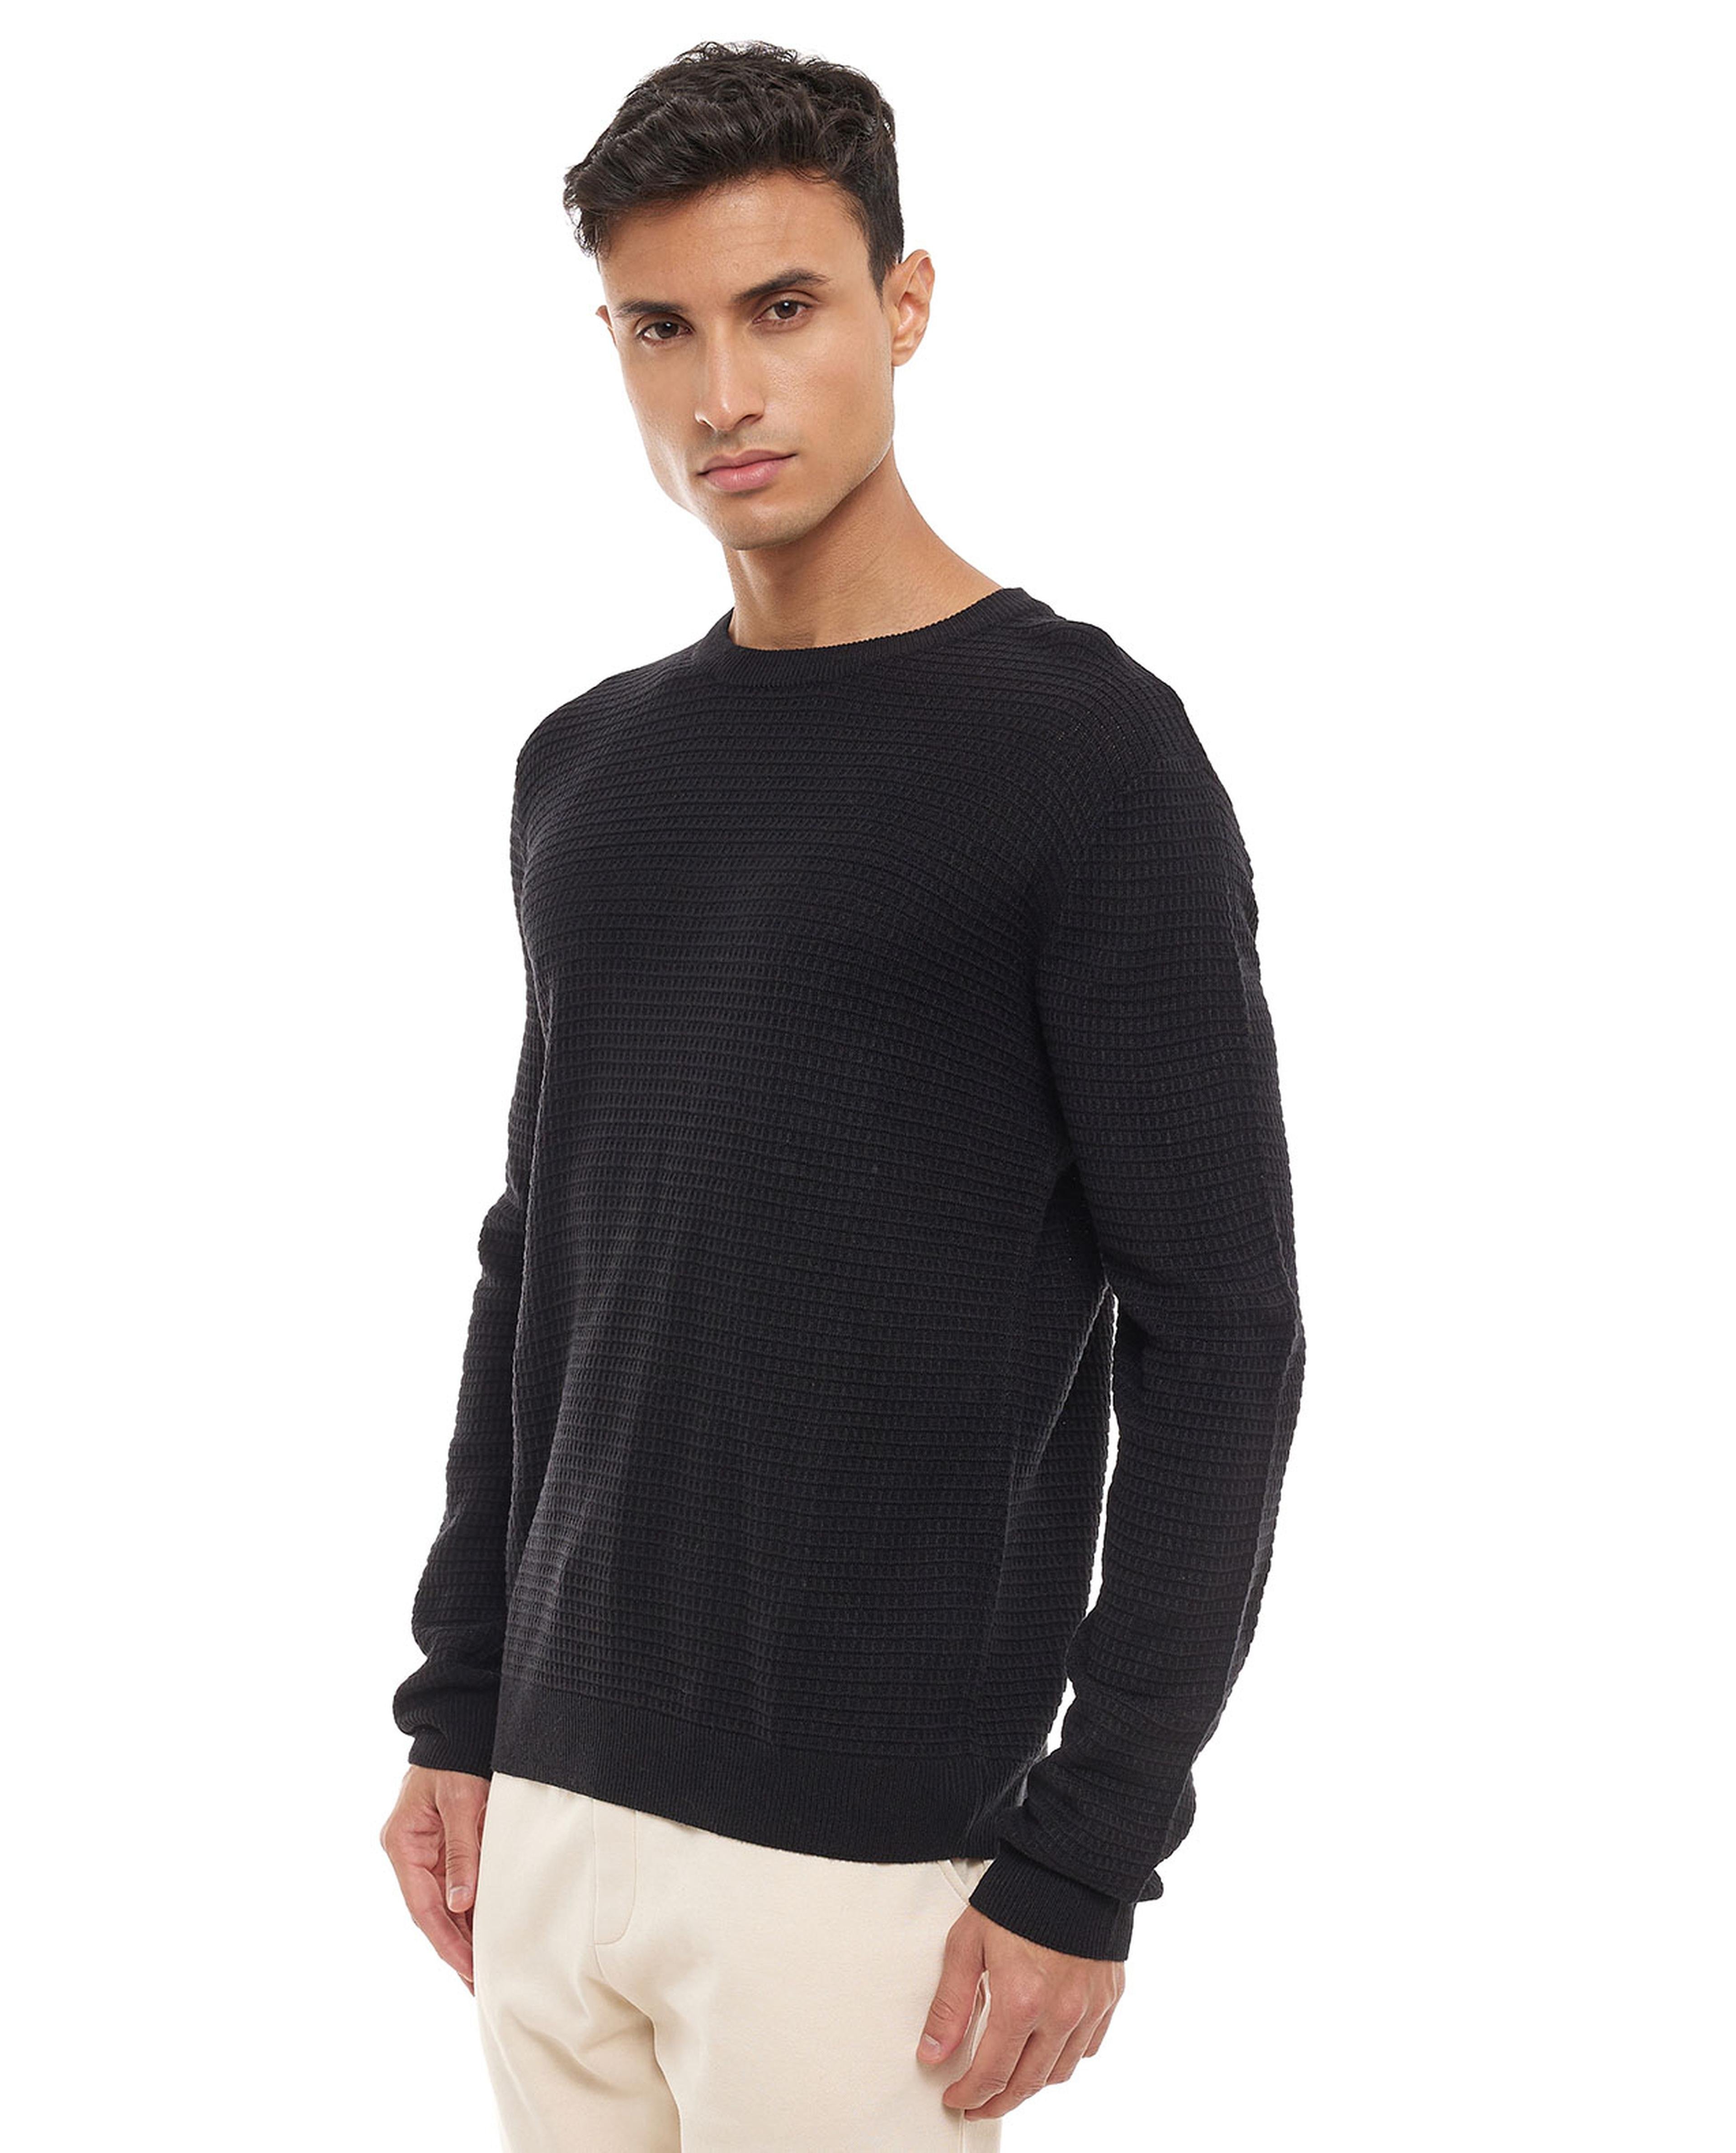 Textured Sweater with Crew Neck and Long Sleeves